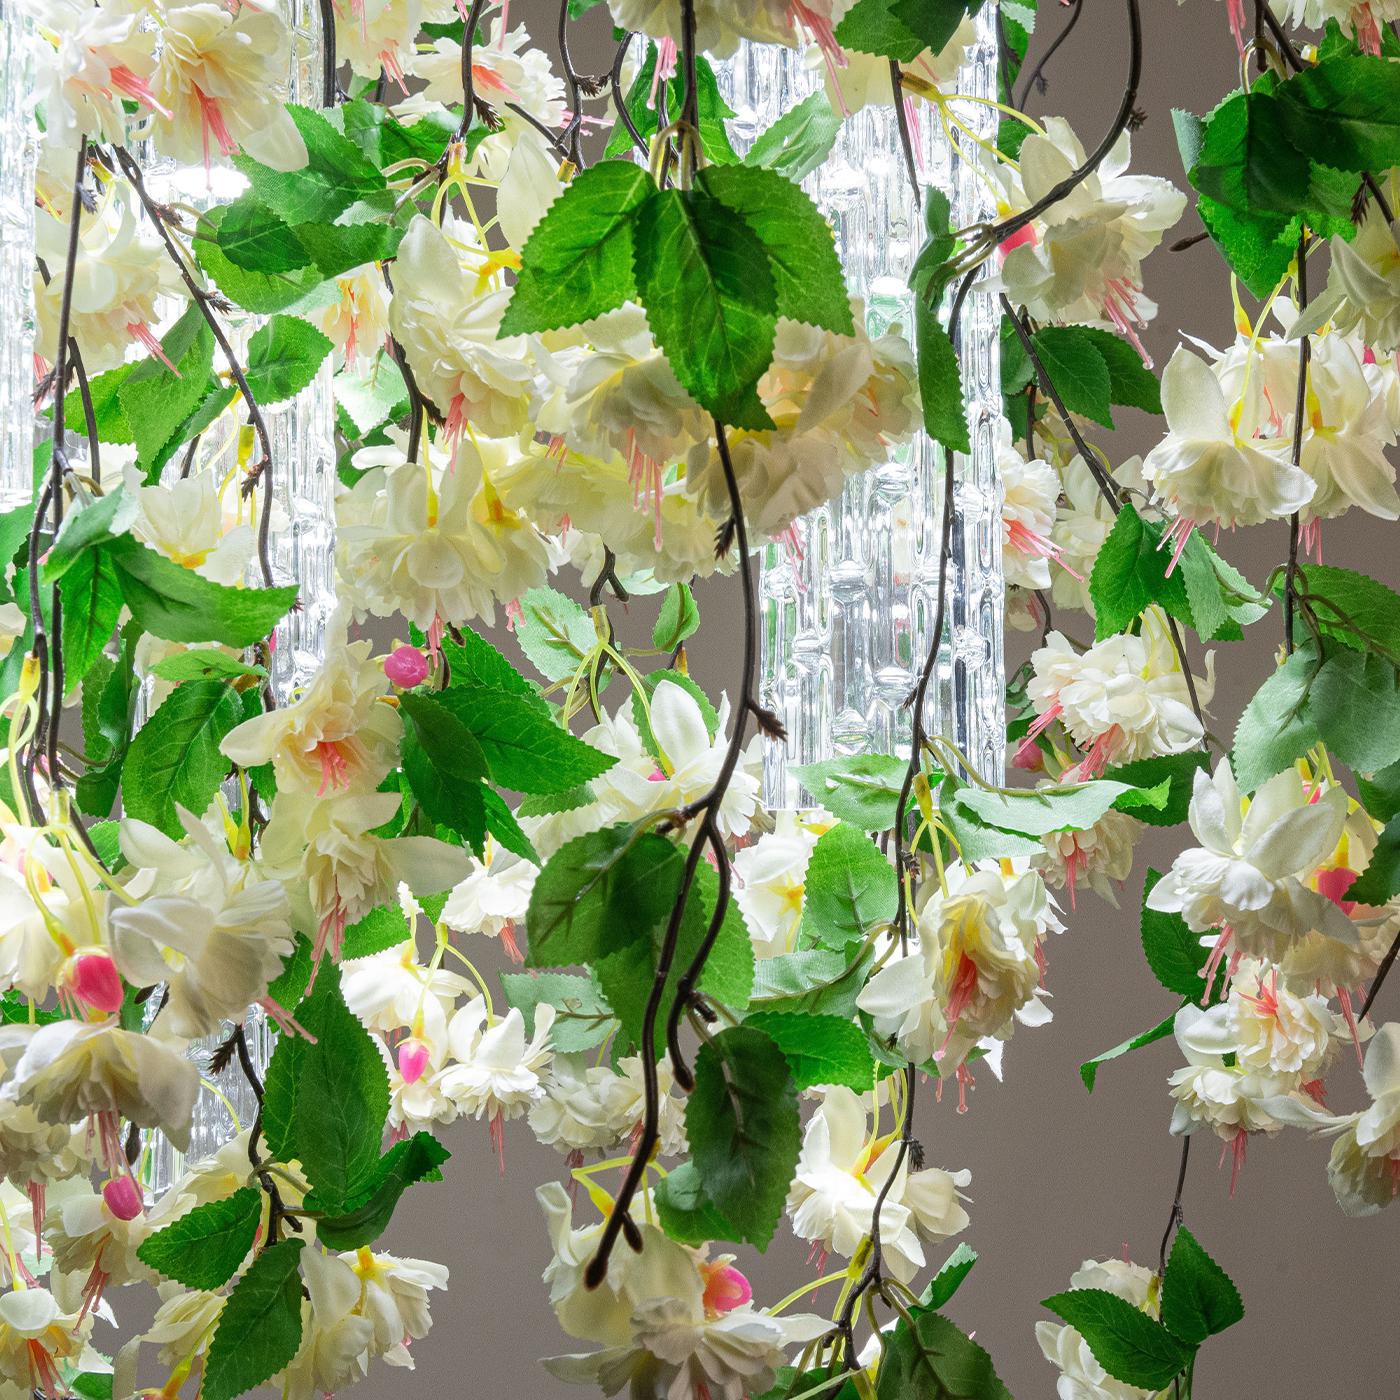 This magnificent piece of design is a harmonious bridge between Nature and human intervention, defined by a glorious cascade of synthetic white flowers partly concealing six handmade Murano glass shades, each supporting a GU10 x 6W LED lightbulb.